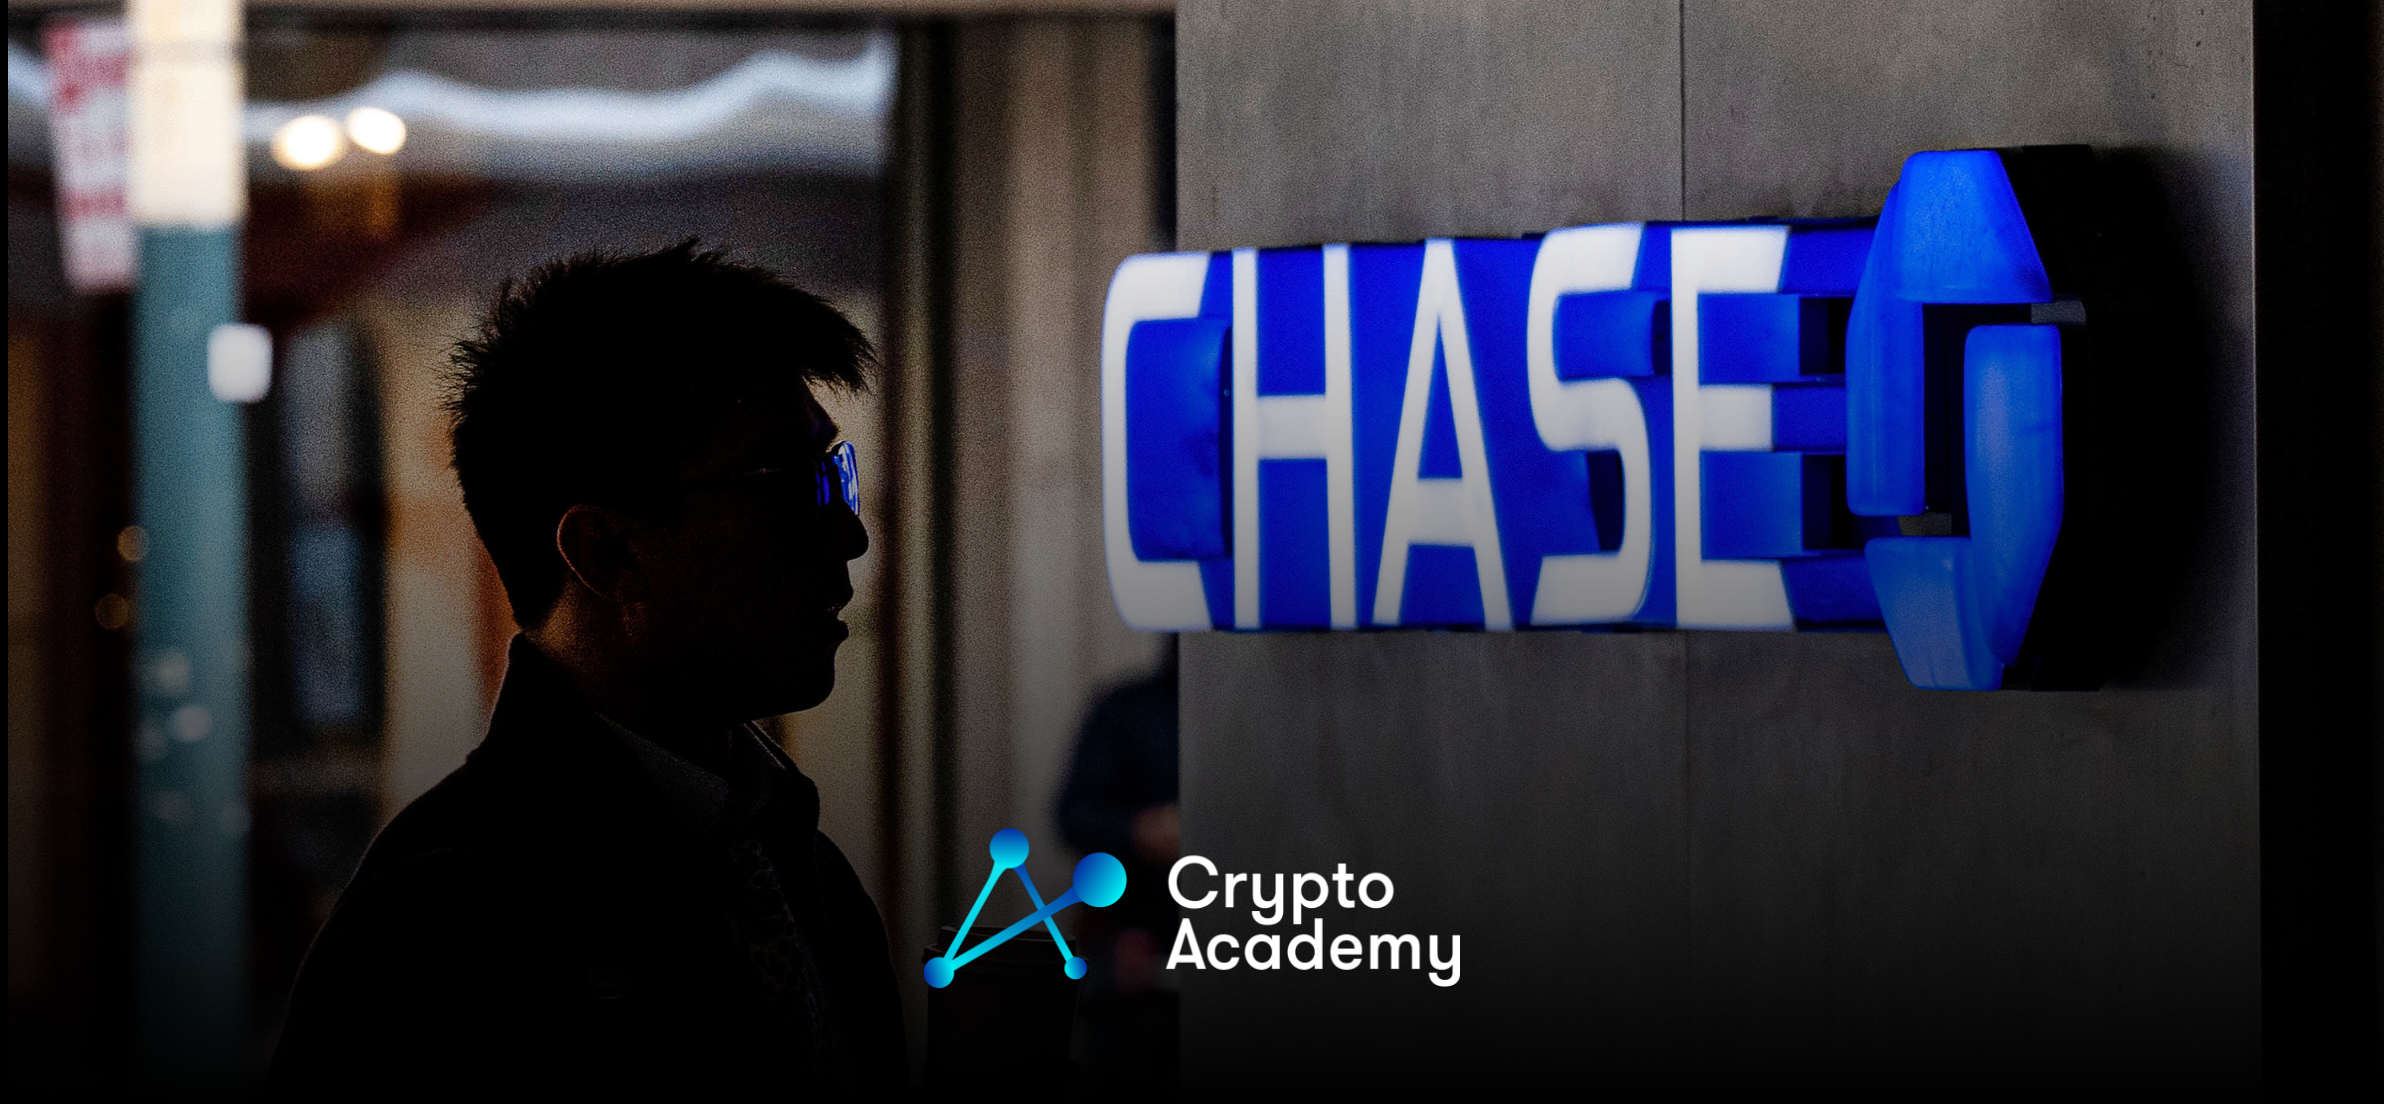 Chase Bank UK to Block Crypto Payments Because of Fraud